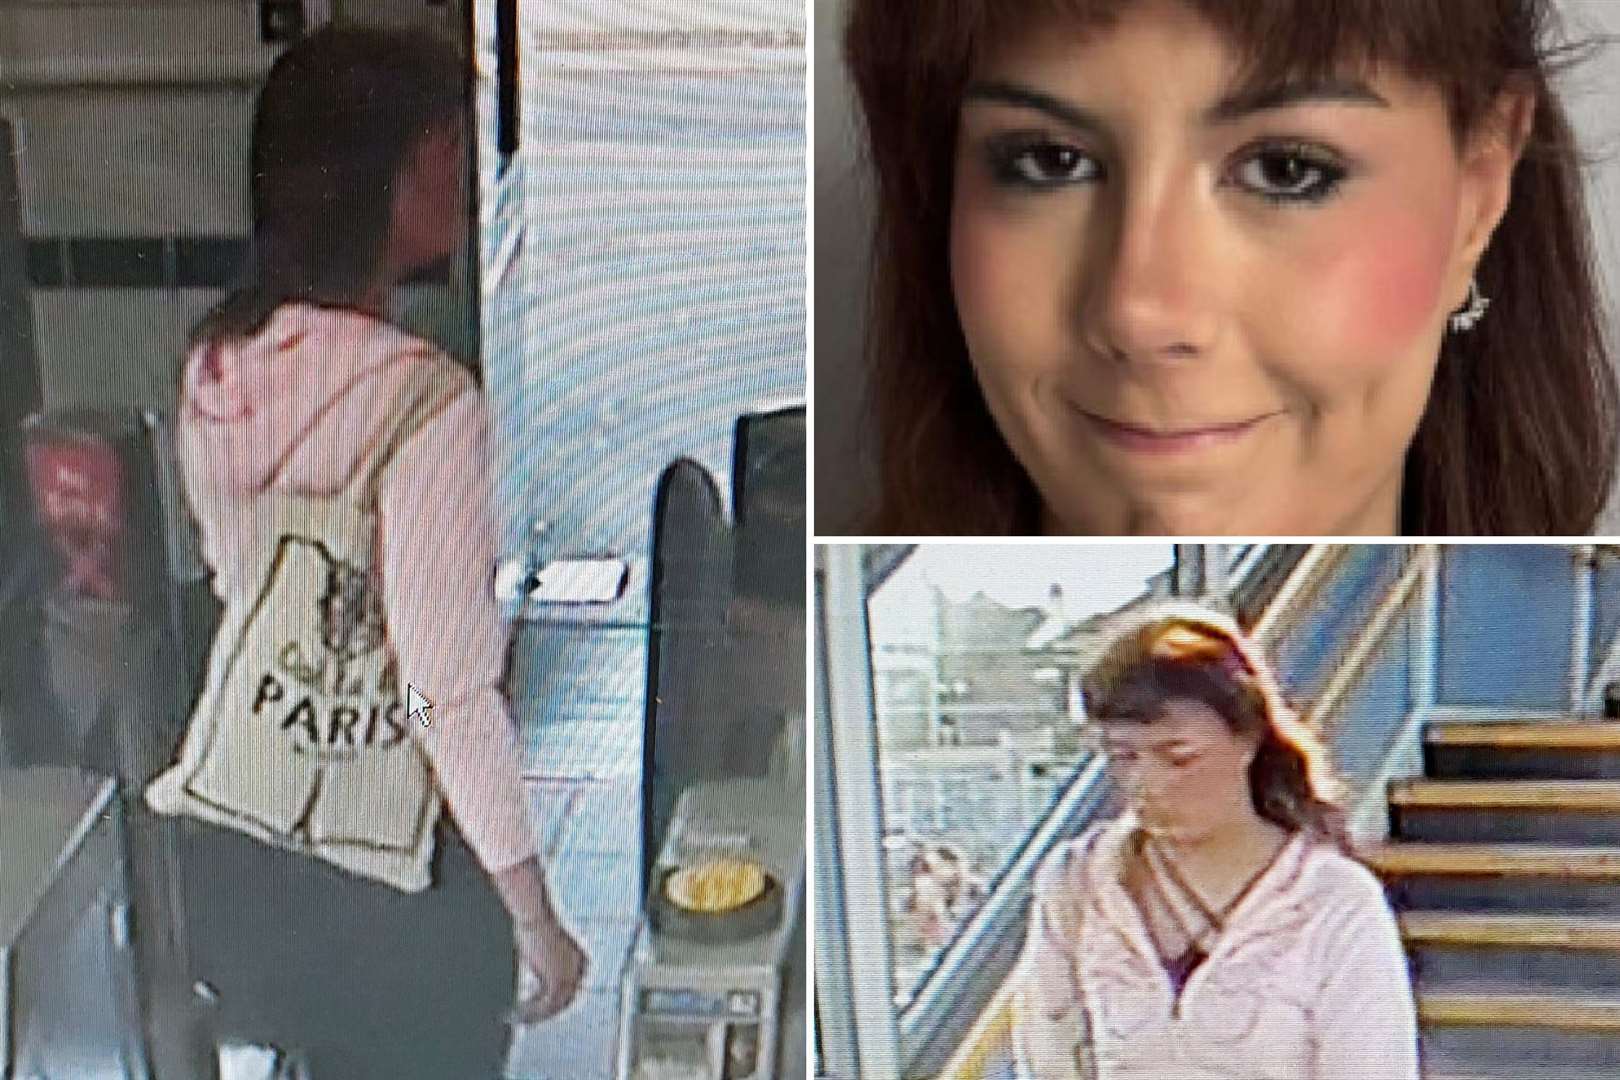 Tilly Carter, 17, was reported missing from Margate and CCTV images show her at Sittingbourne railway station. Picture: Kent Police